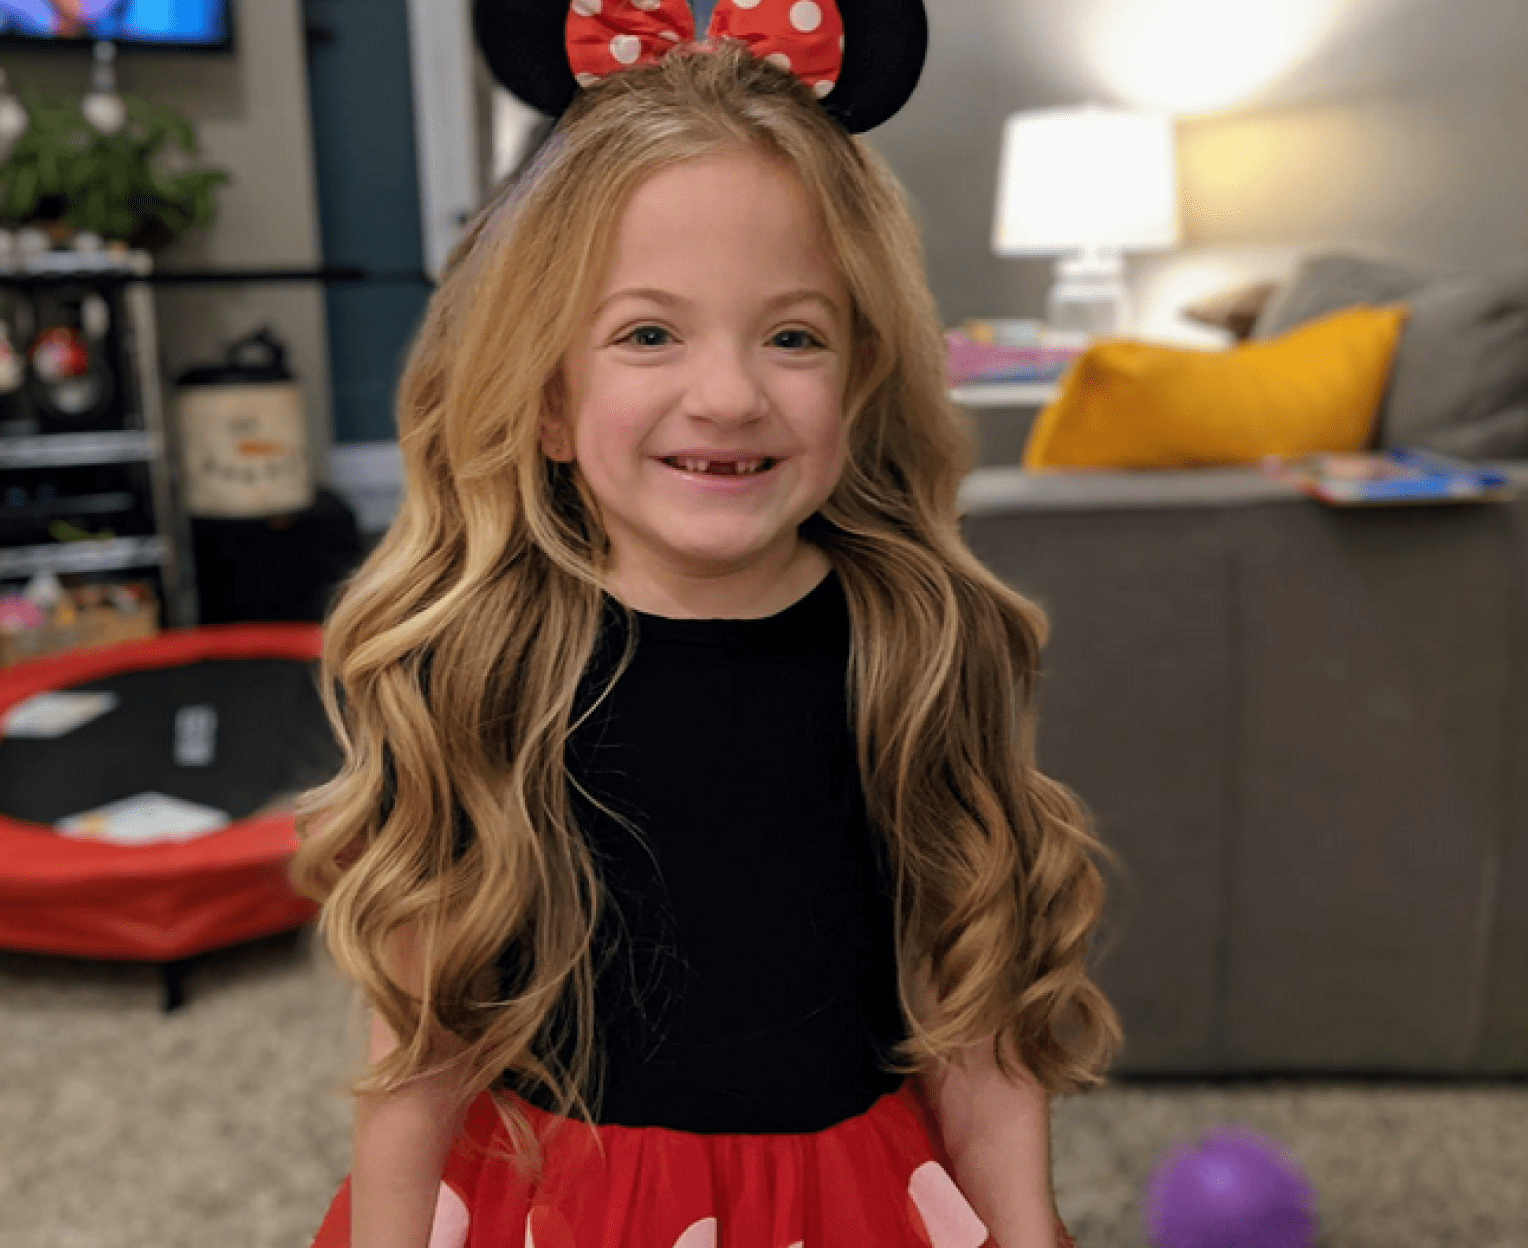 Girl in Minnie Mouse costume in her living room